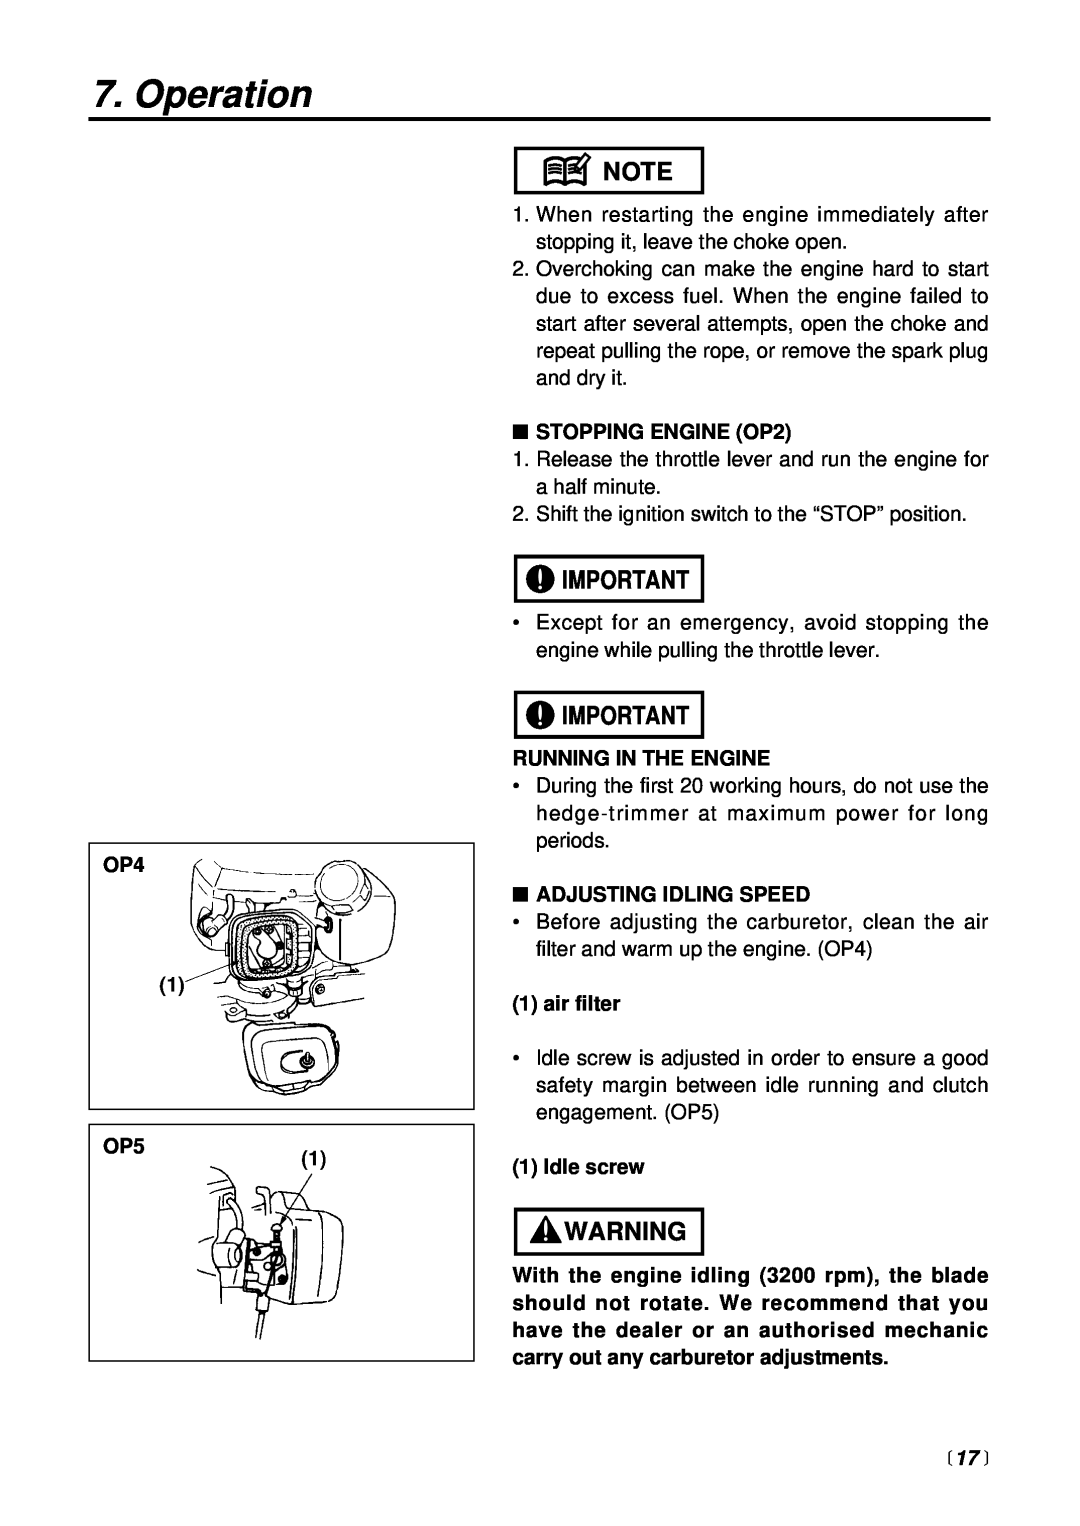 Zenoah CHT2301, HT2301 manual 17 , Operation, OP4 OP5, STOPPING ENGINE OP2, Running In The Engine, Adjusting Idling Speed 